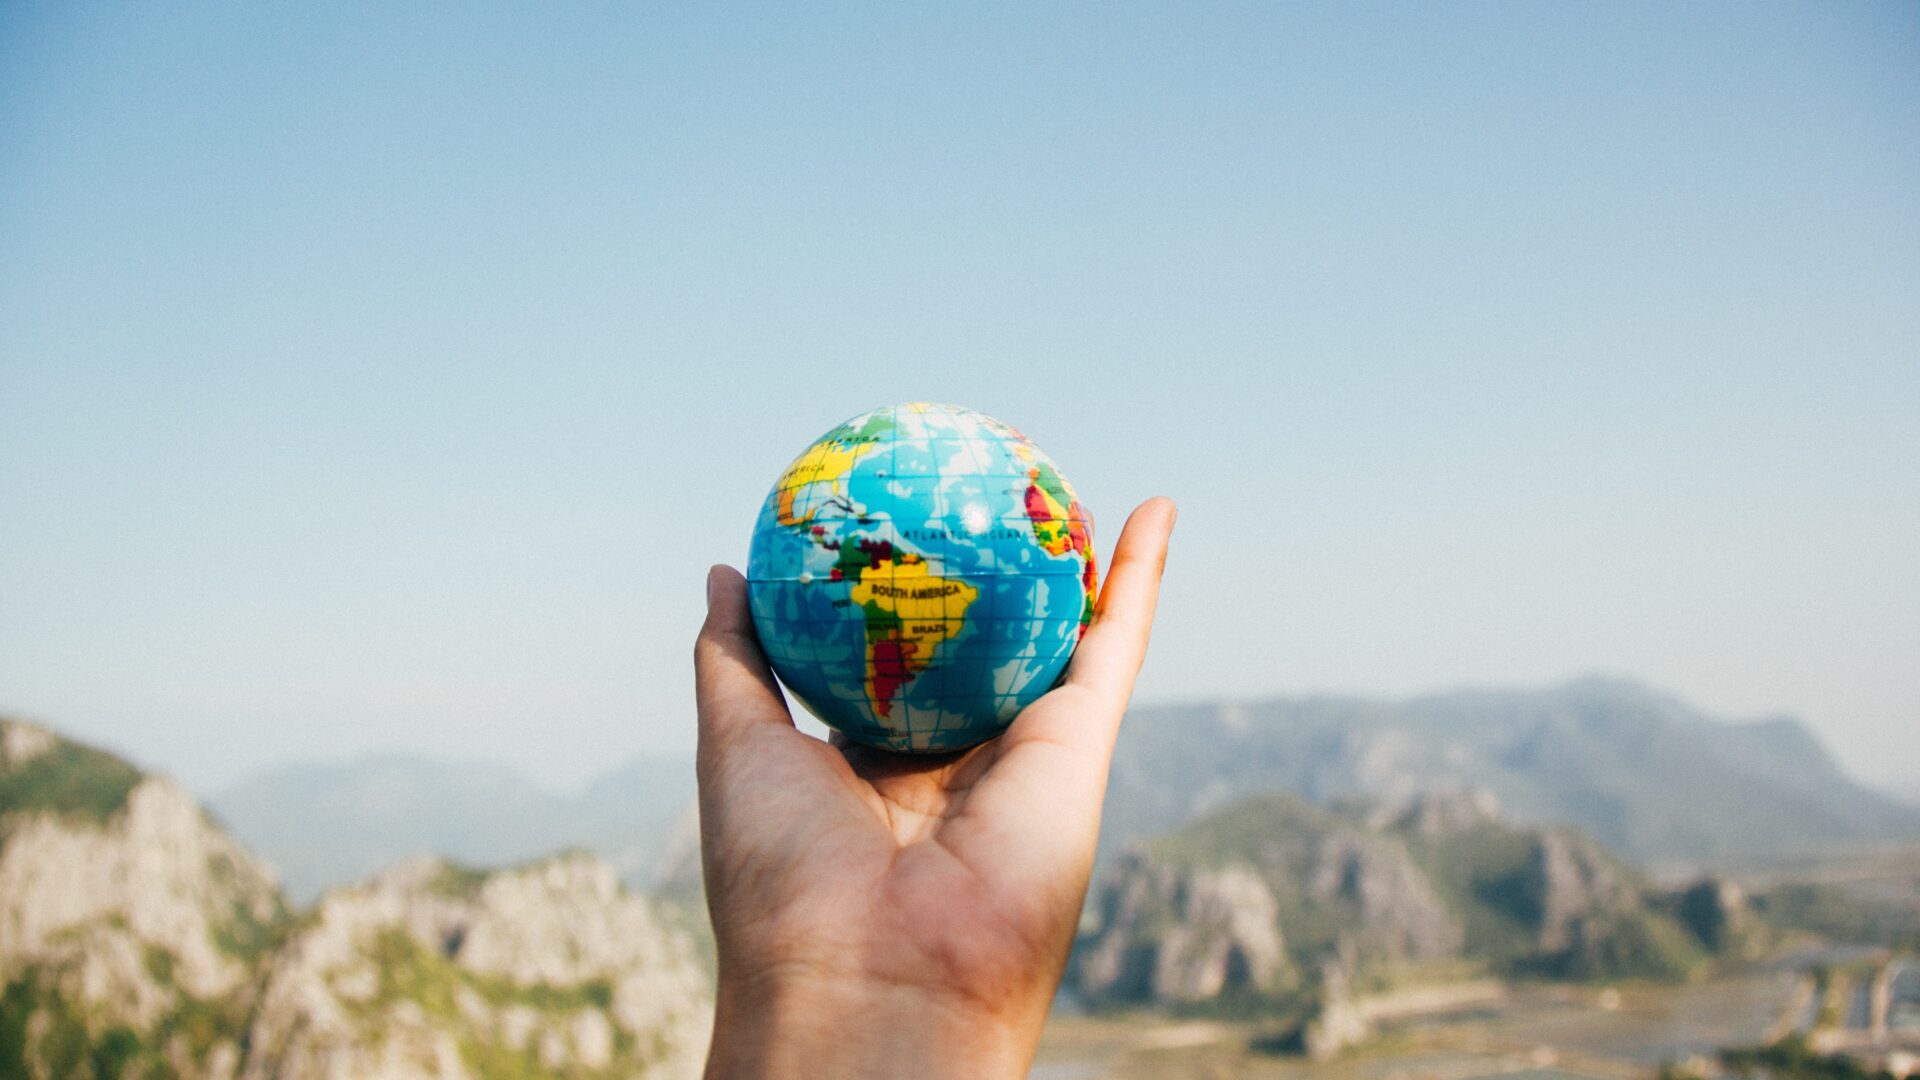 Stock image showing a hand holding a miniature globe